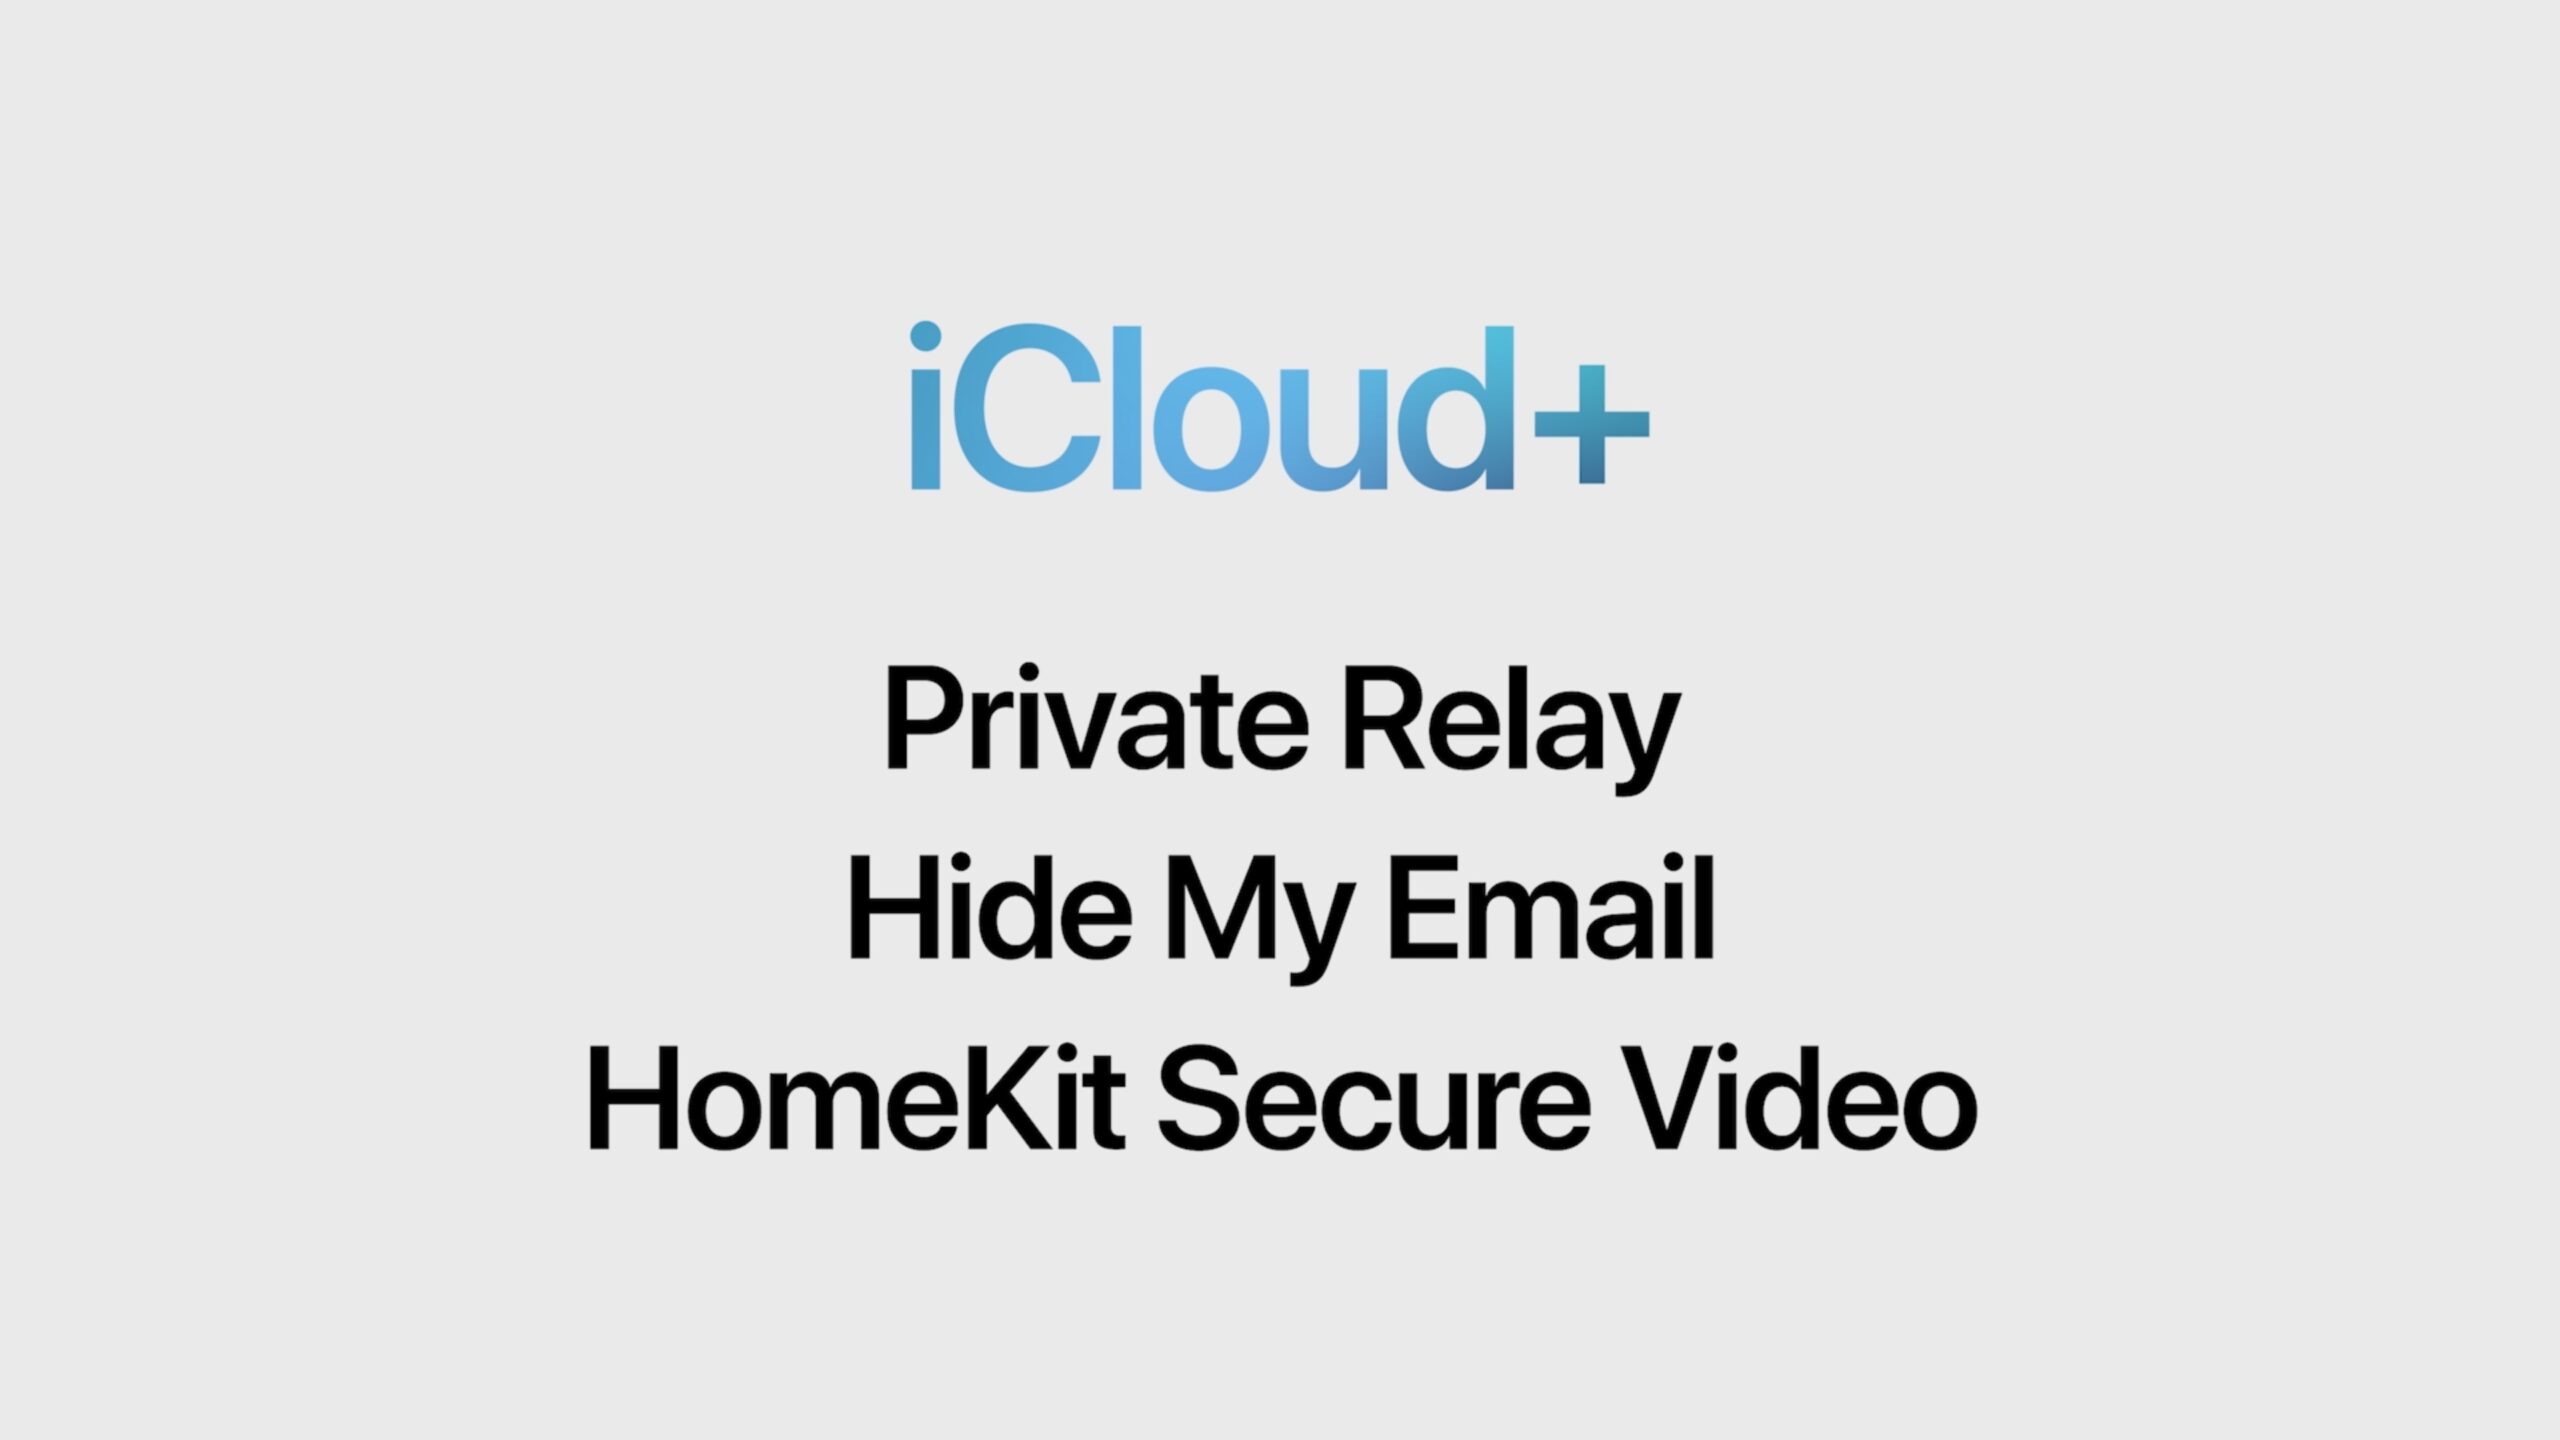 Everything you need to know about iCloud+